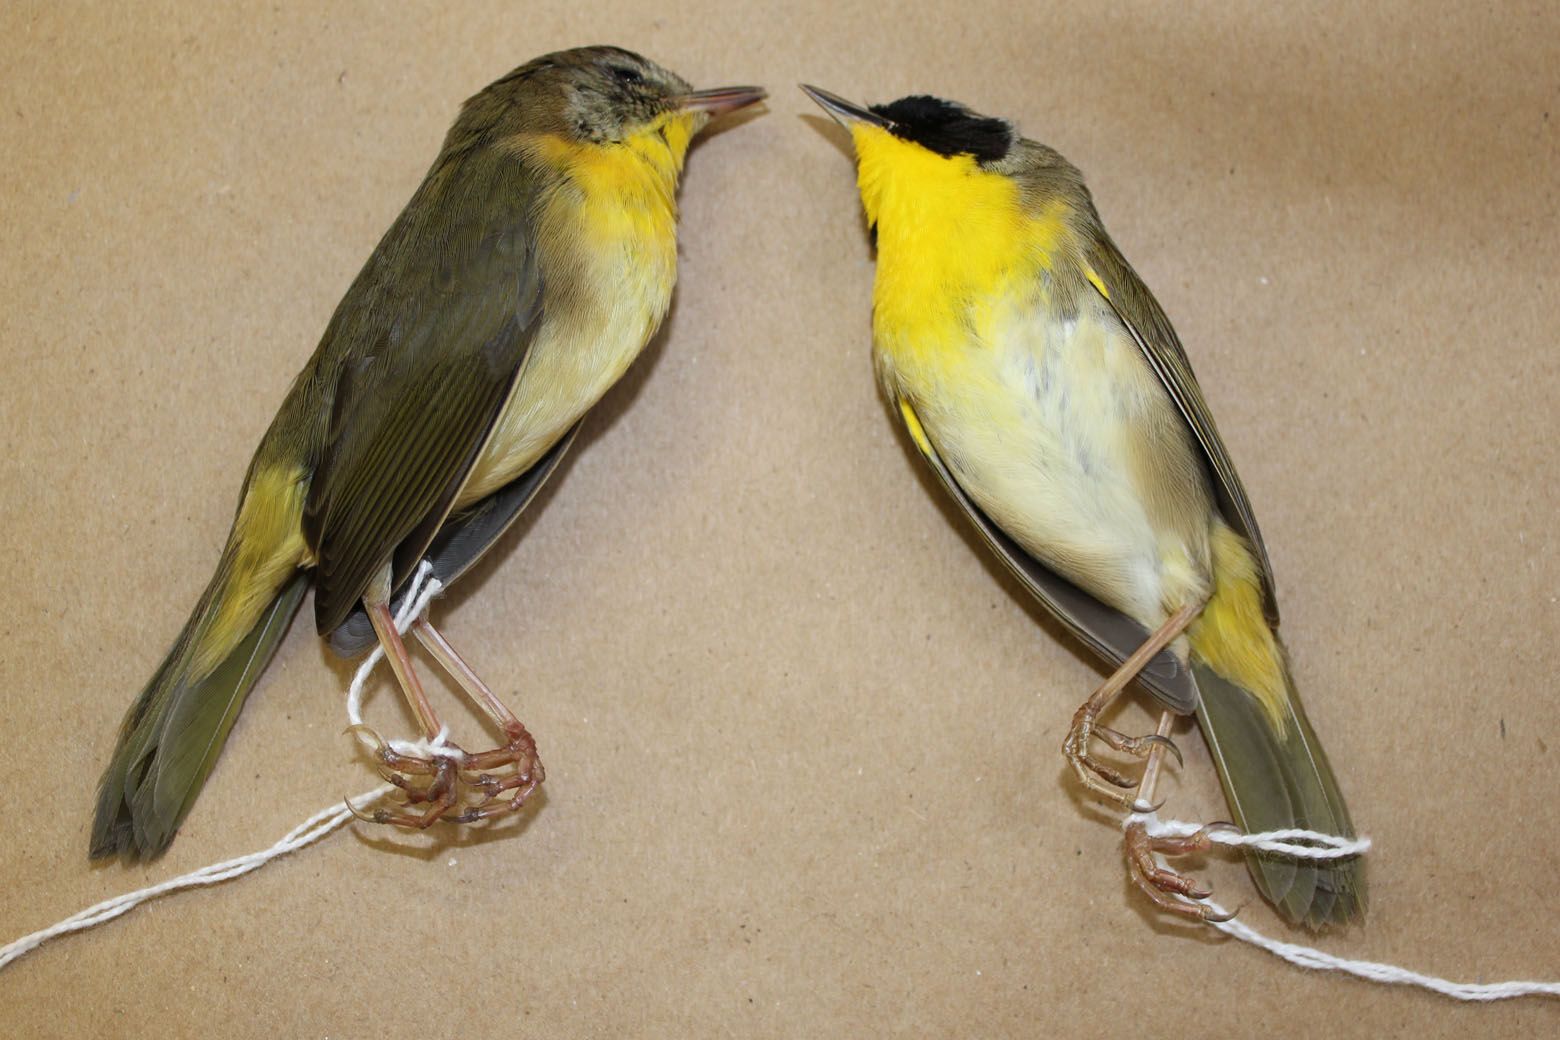 A male and female throat throat found by volunteers working to prevent bird collisions.  (Courtesy City Wildlife)